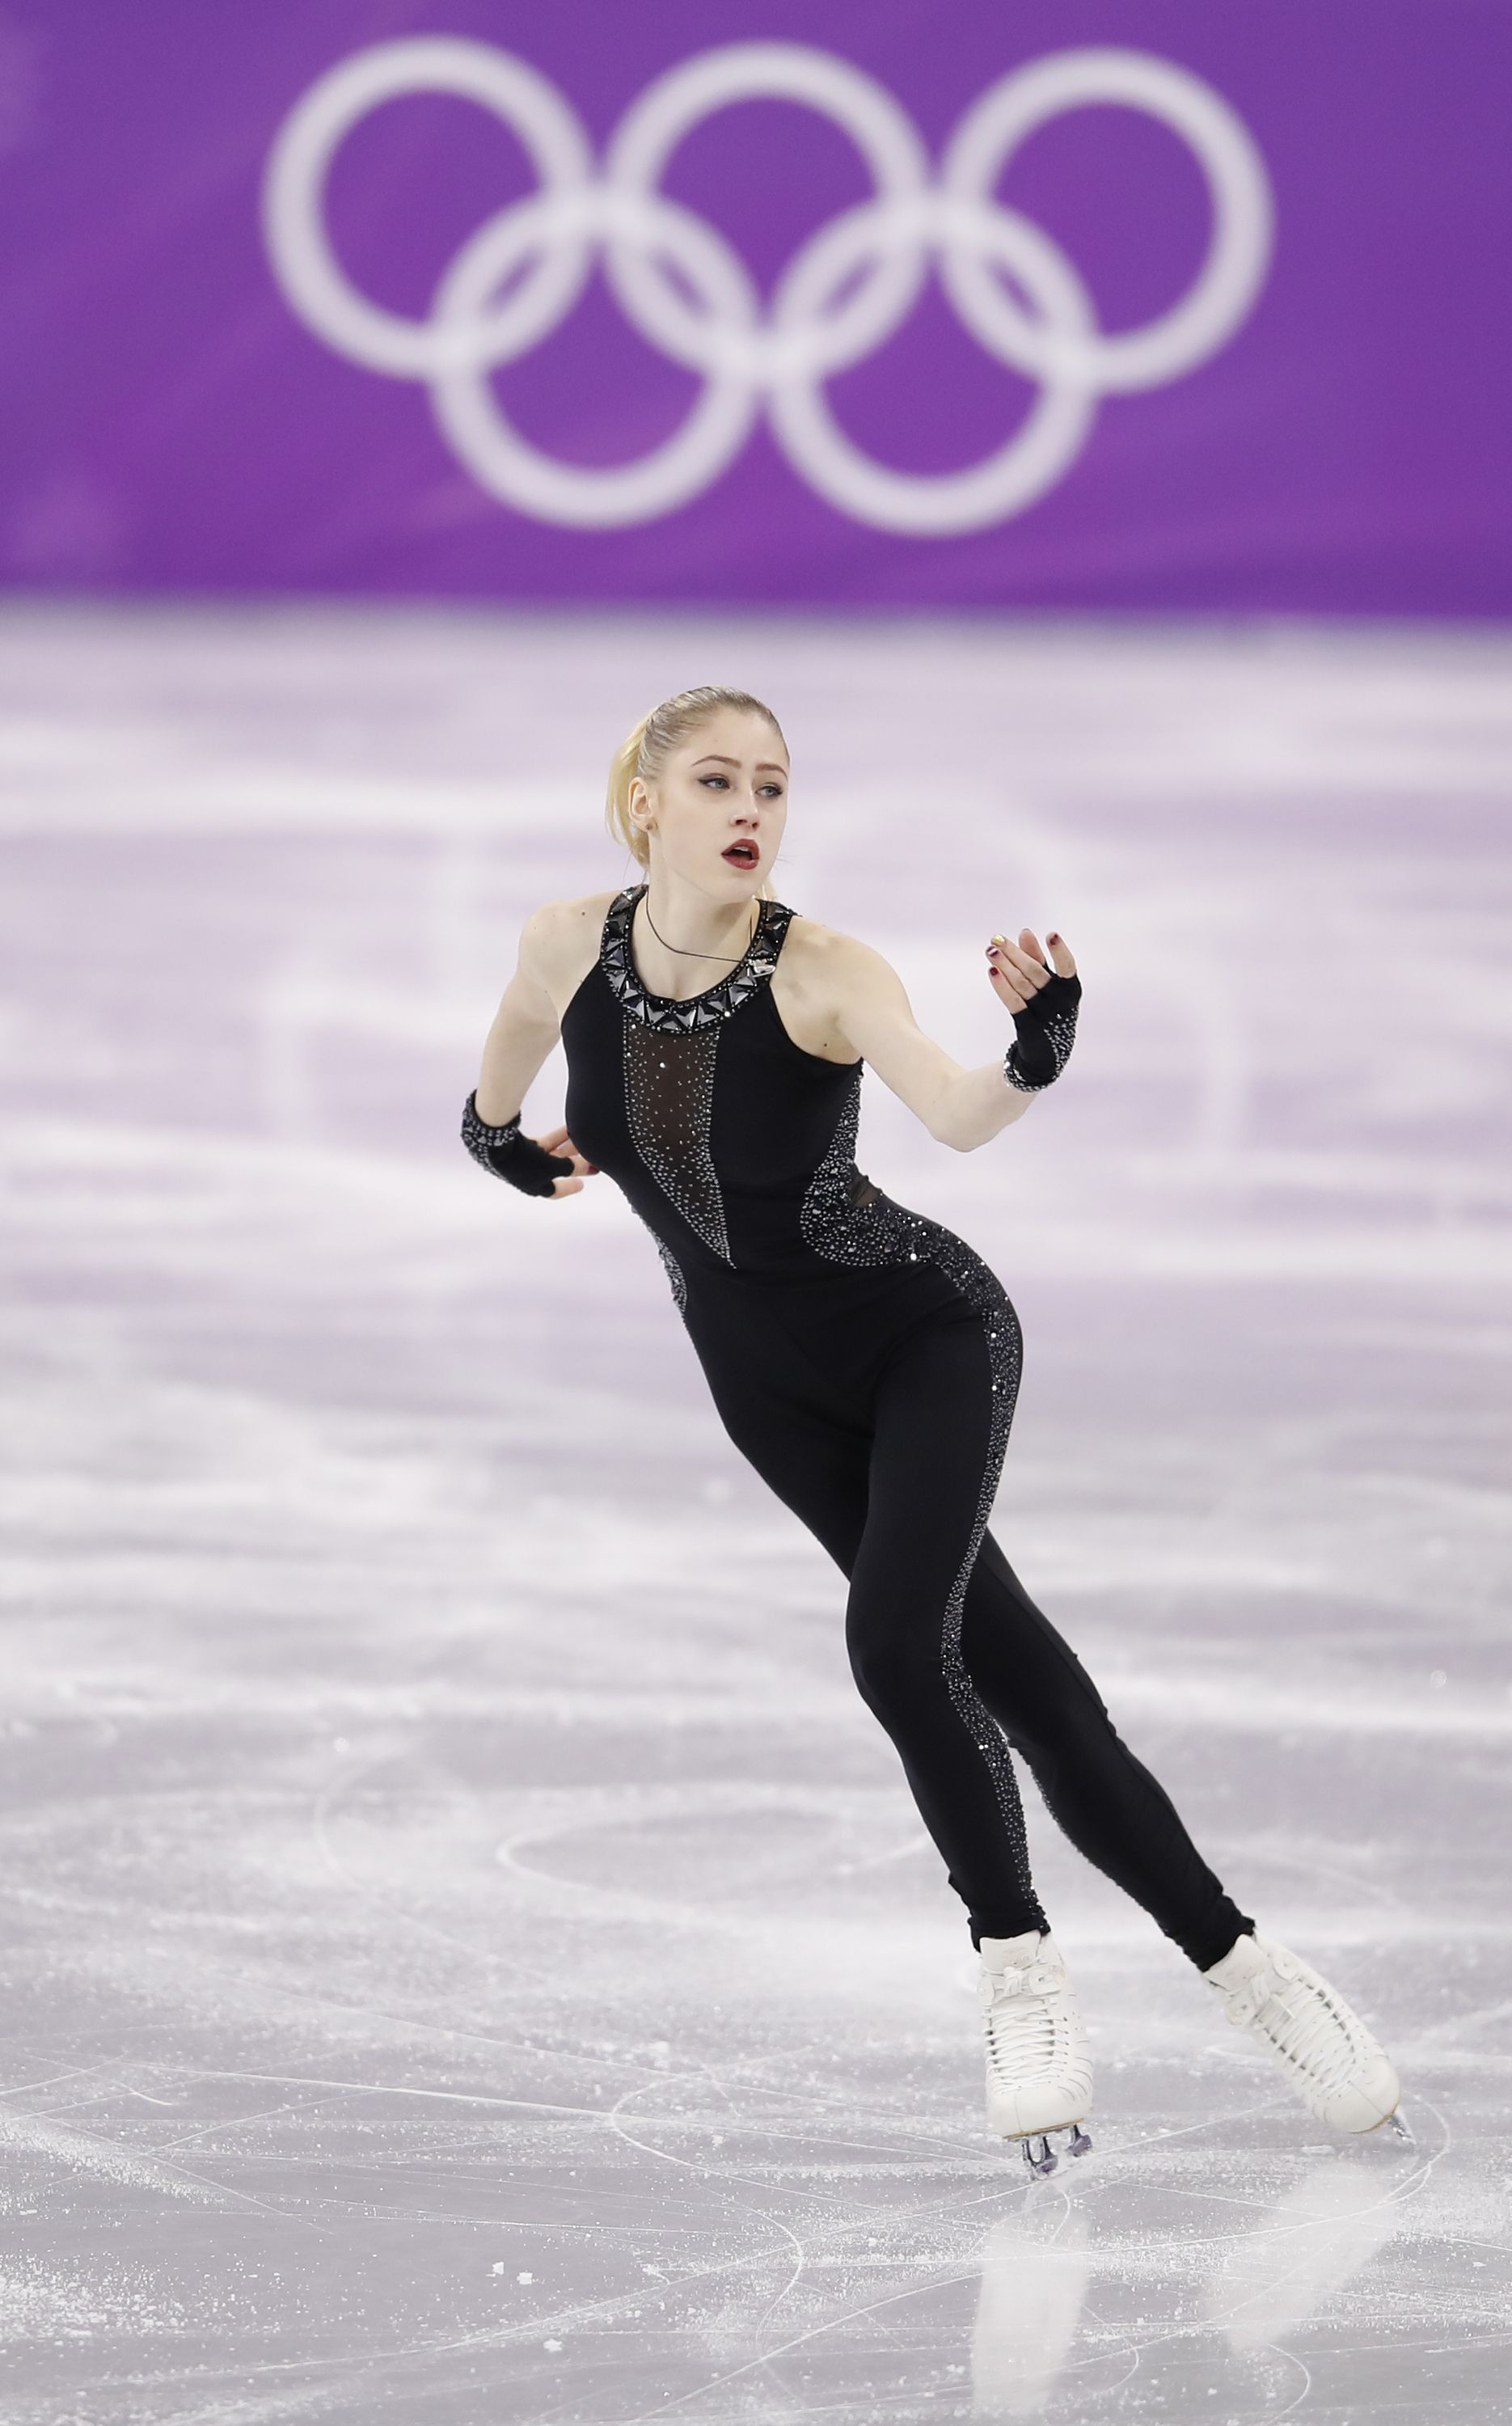 Latvian Figure Skater Diana Nikitina Wears a Sequined Catsuit for Her Short Program